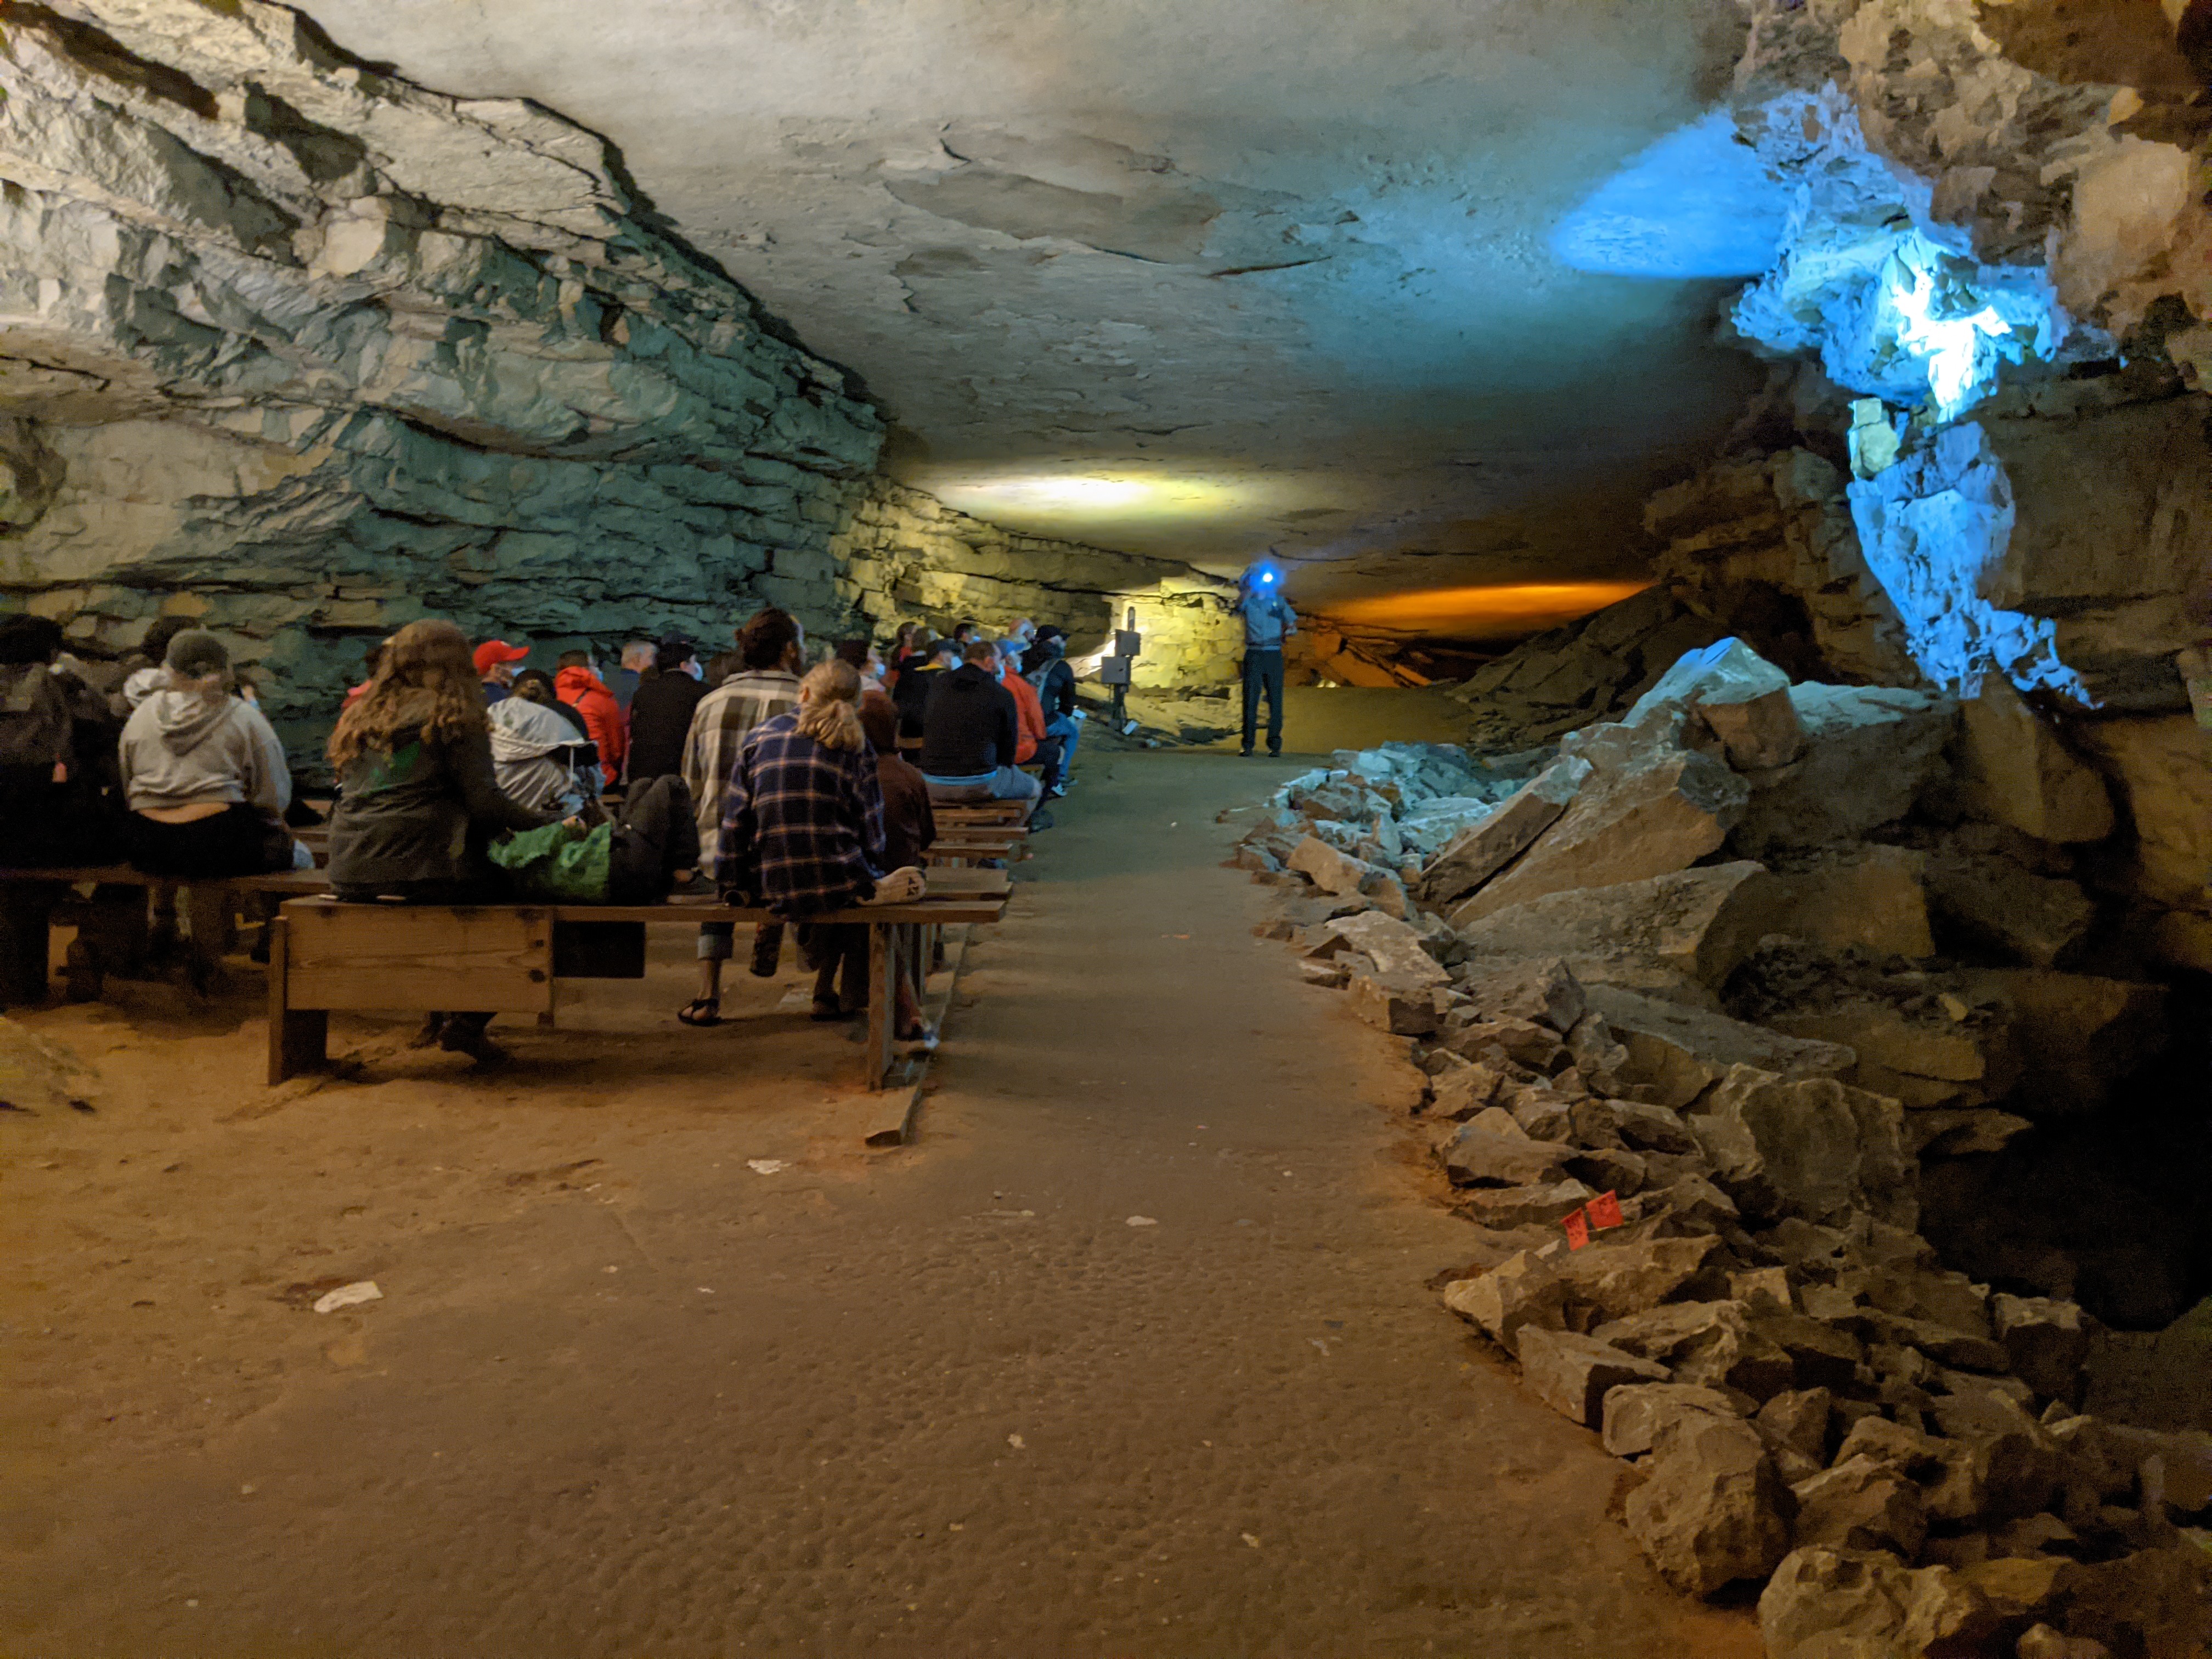 A large cave room with people sitting on wooden benches.